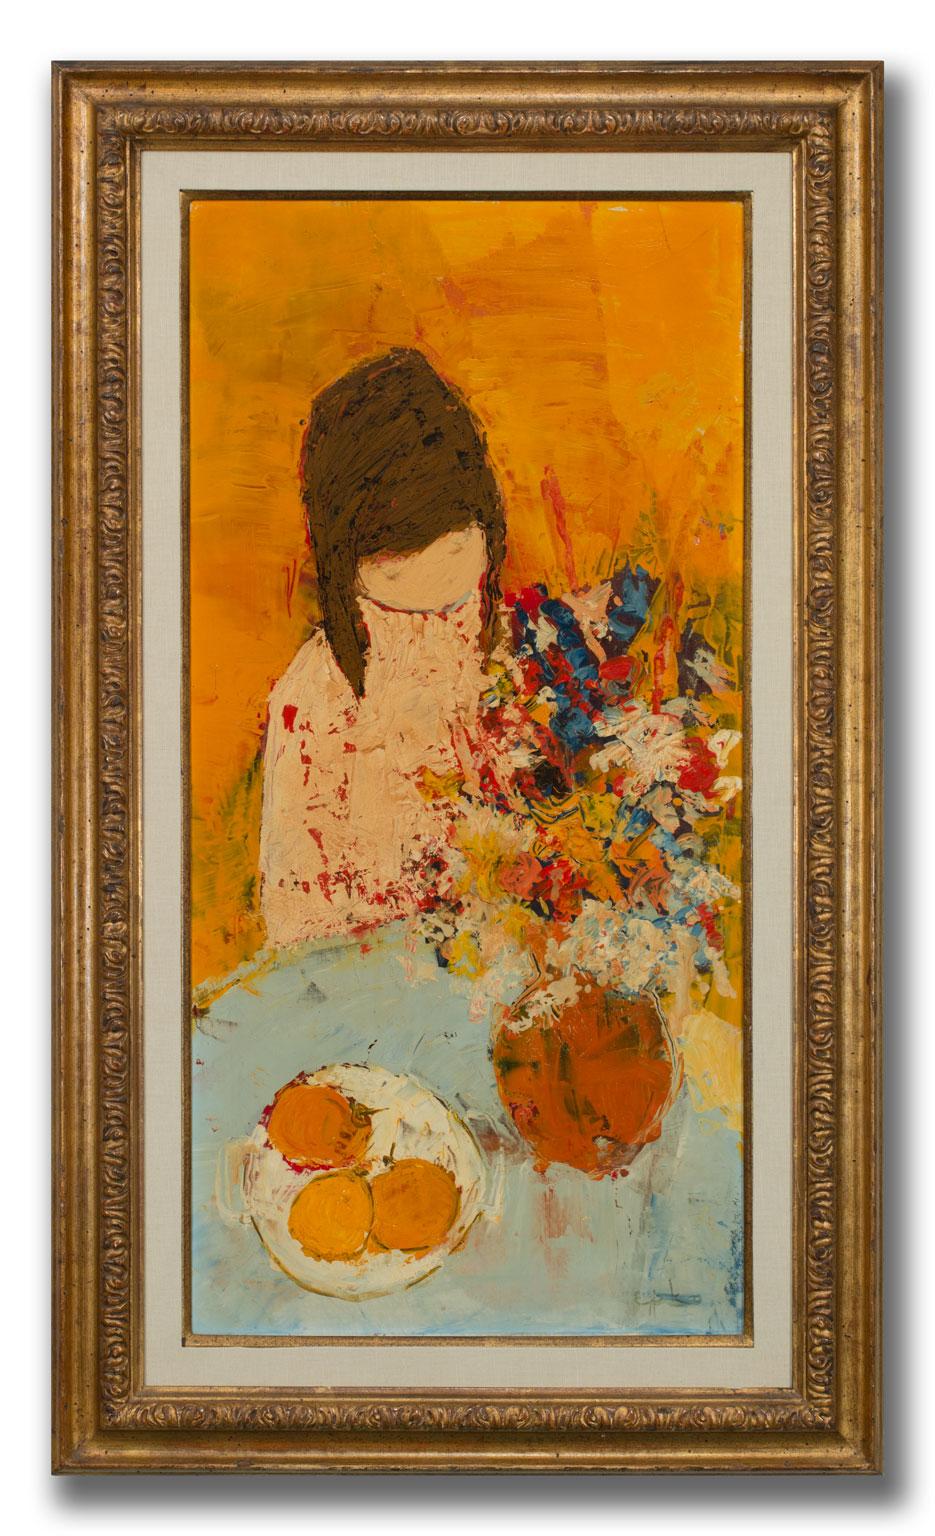 Untitled, a still life and figurative abstract original oil on canvas by Willering Epko, is a piece for the true collector. Epko's striking use of color has been applauded for his dismantling of the boundary between abstraction and figuration. The